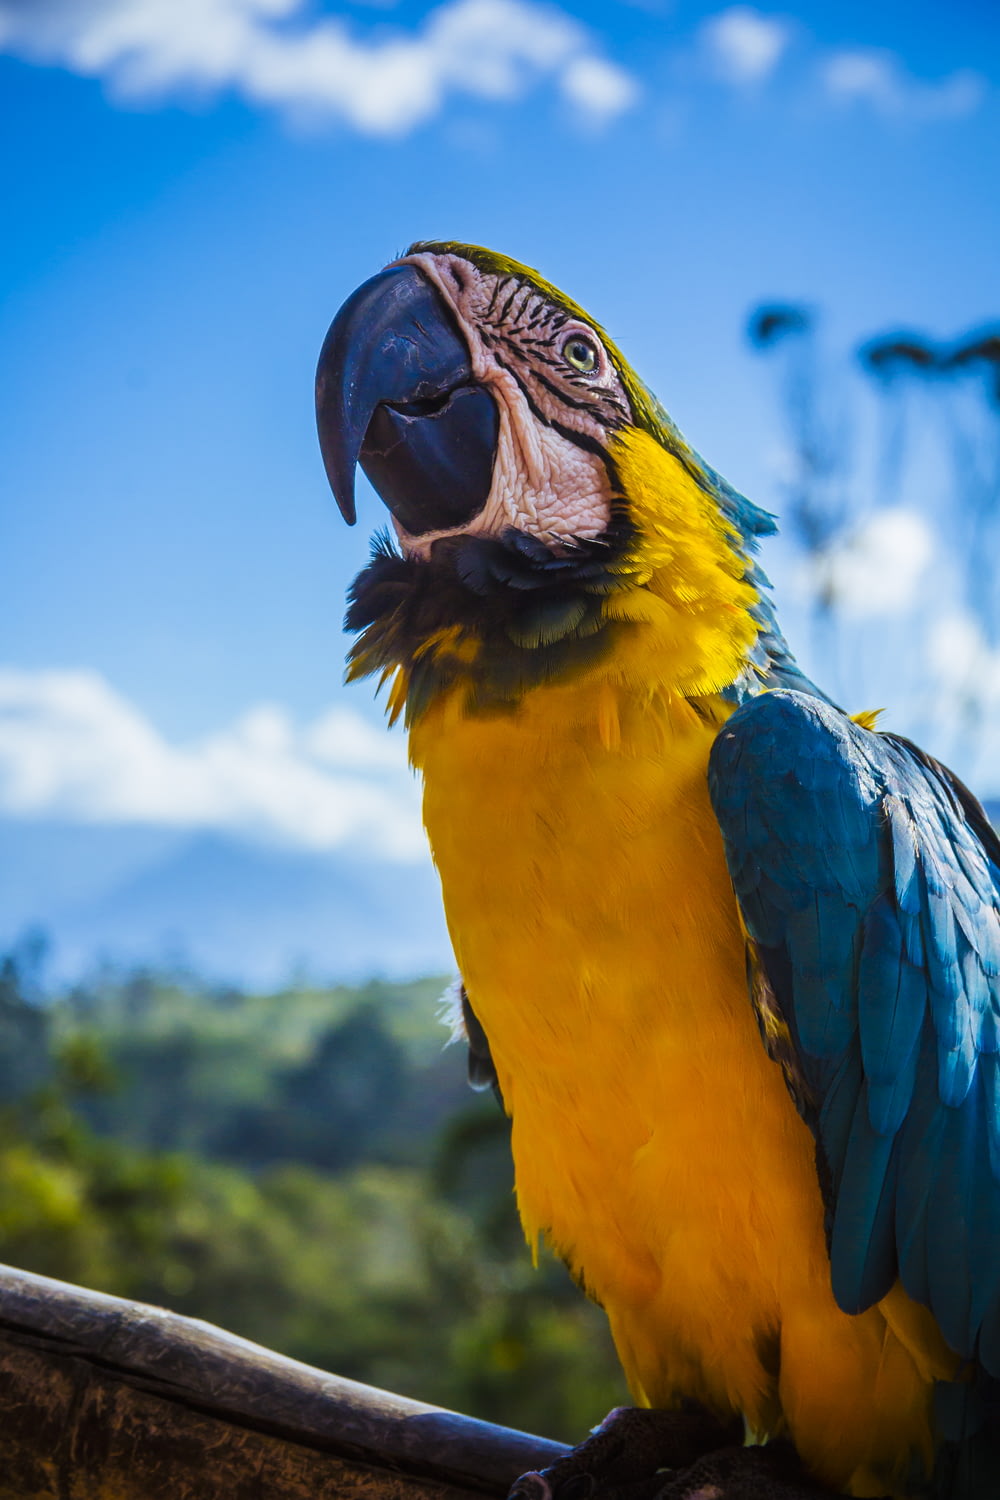 yellow and blue parrot perched on wood